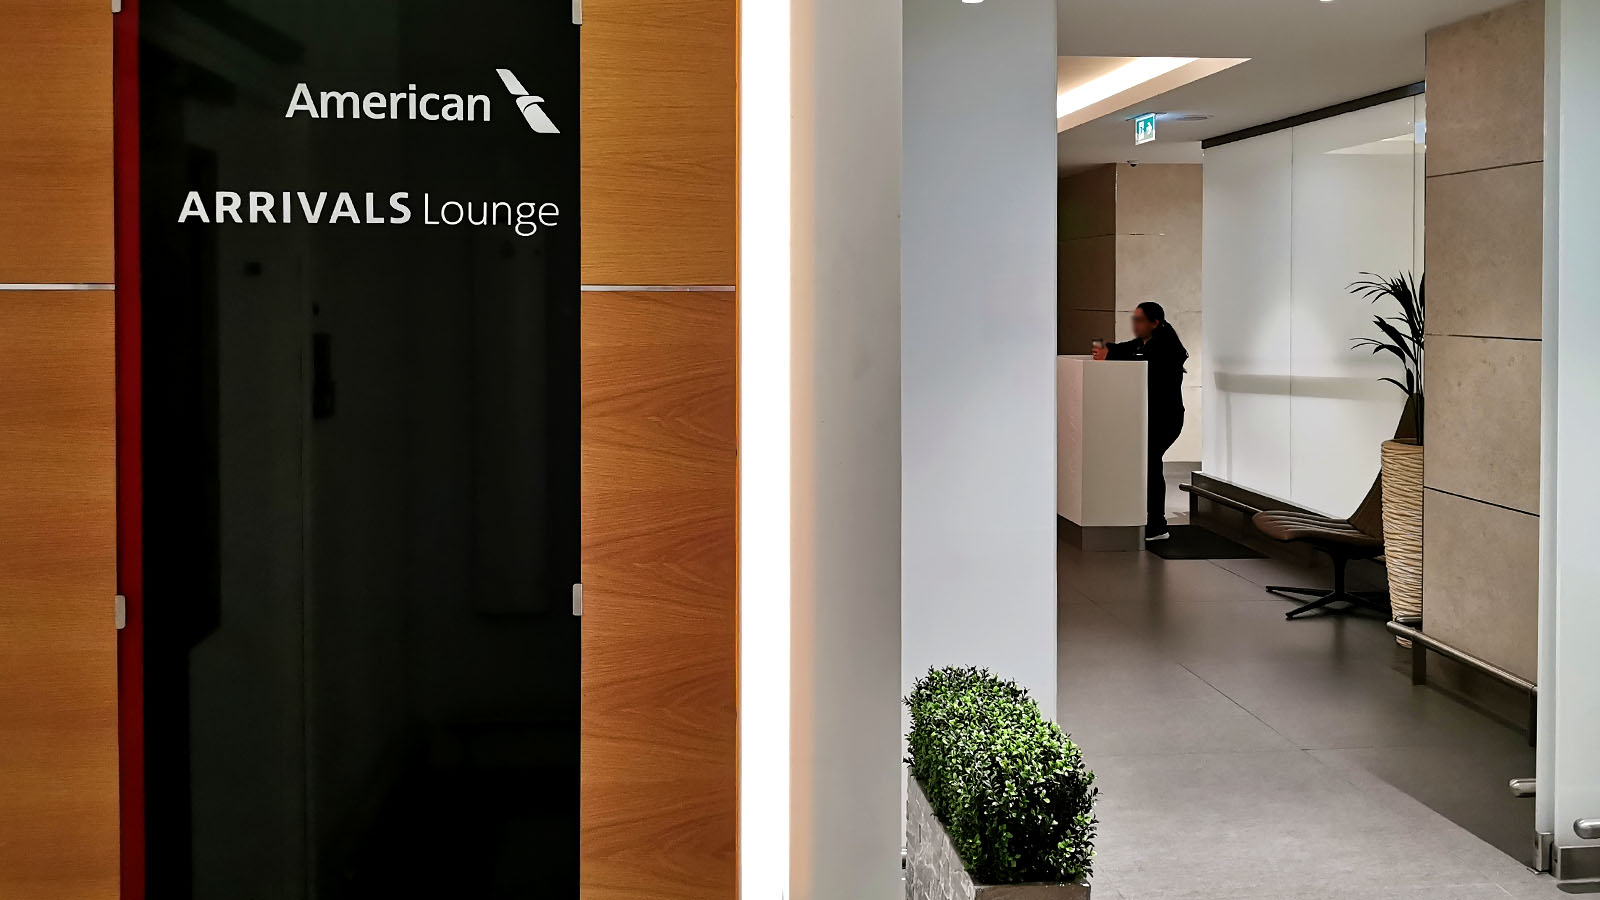 Exterior of the American Airlines Arrivals Lounge at London Heathrow